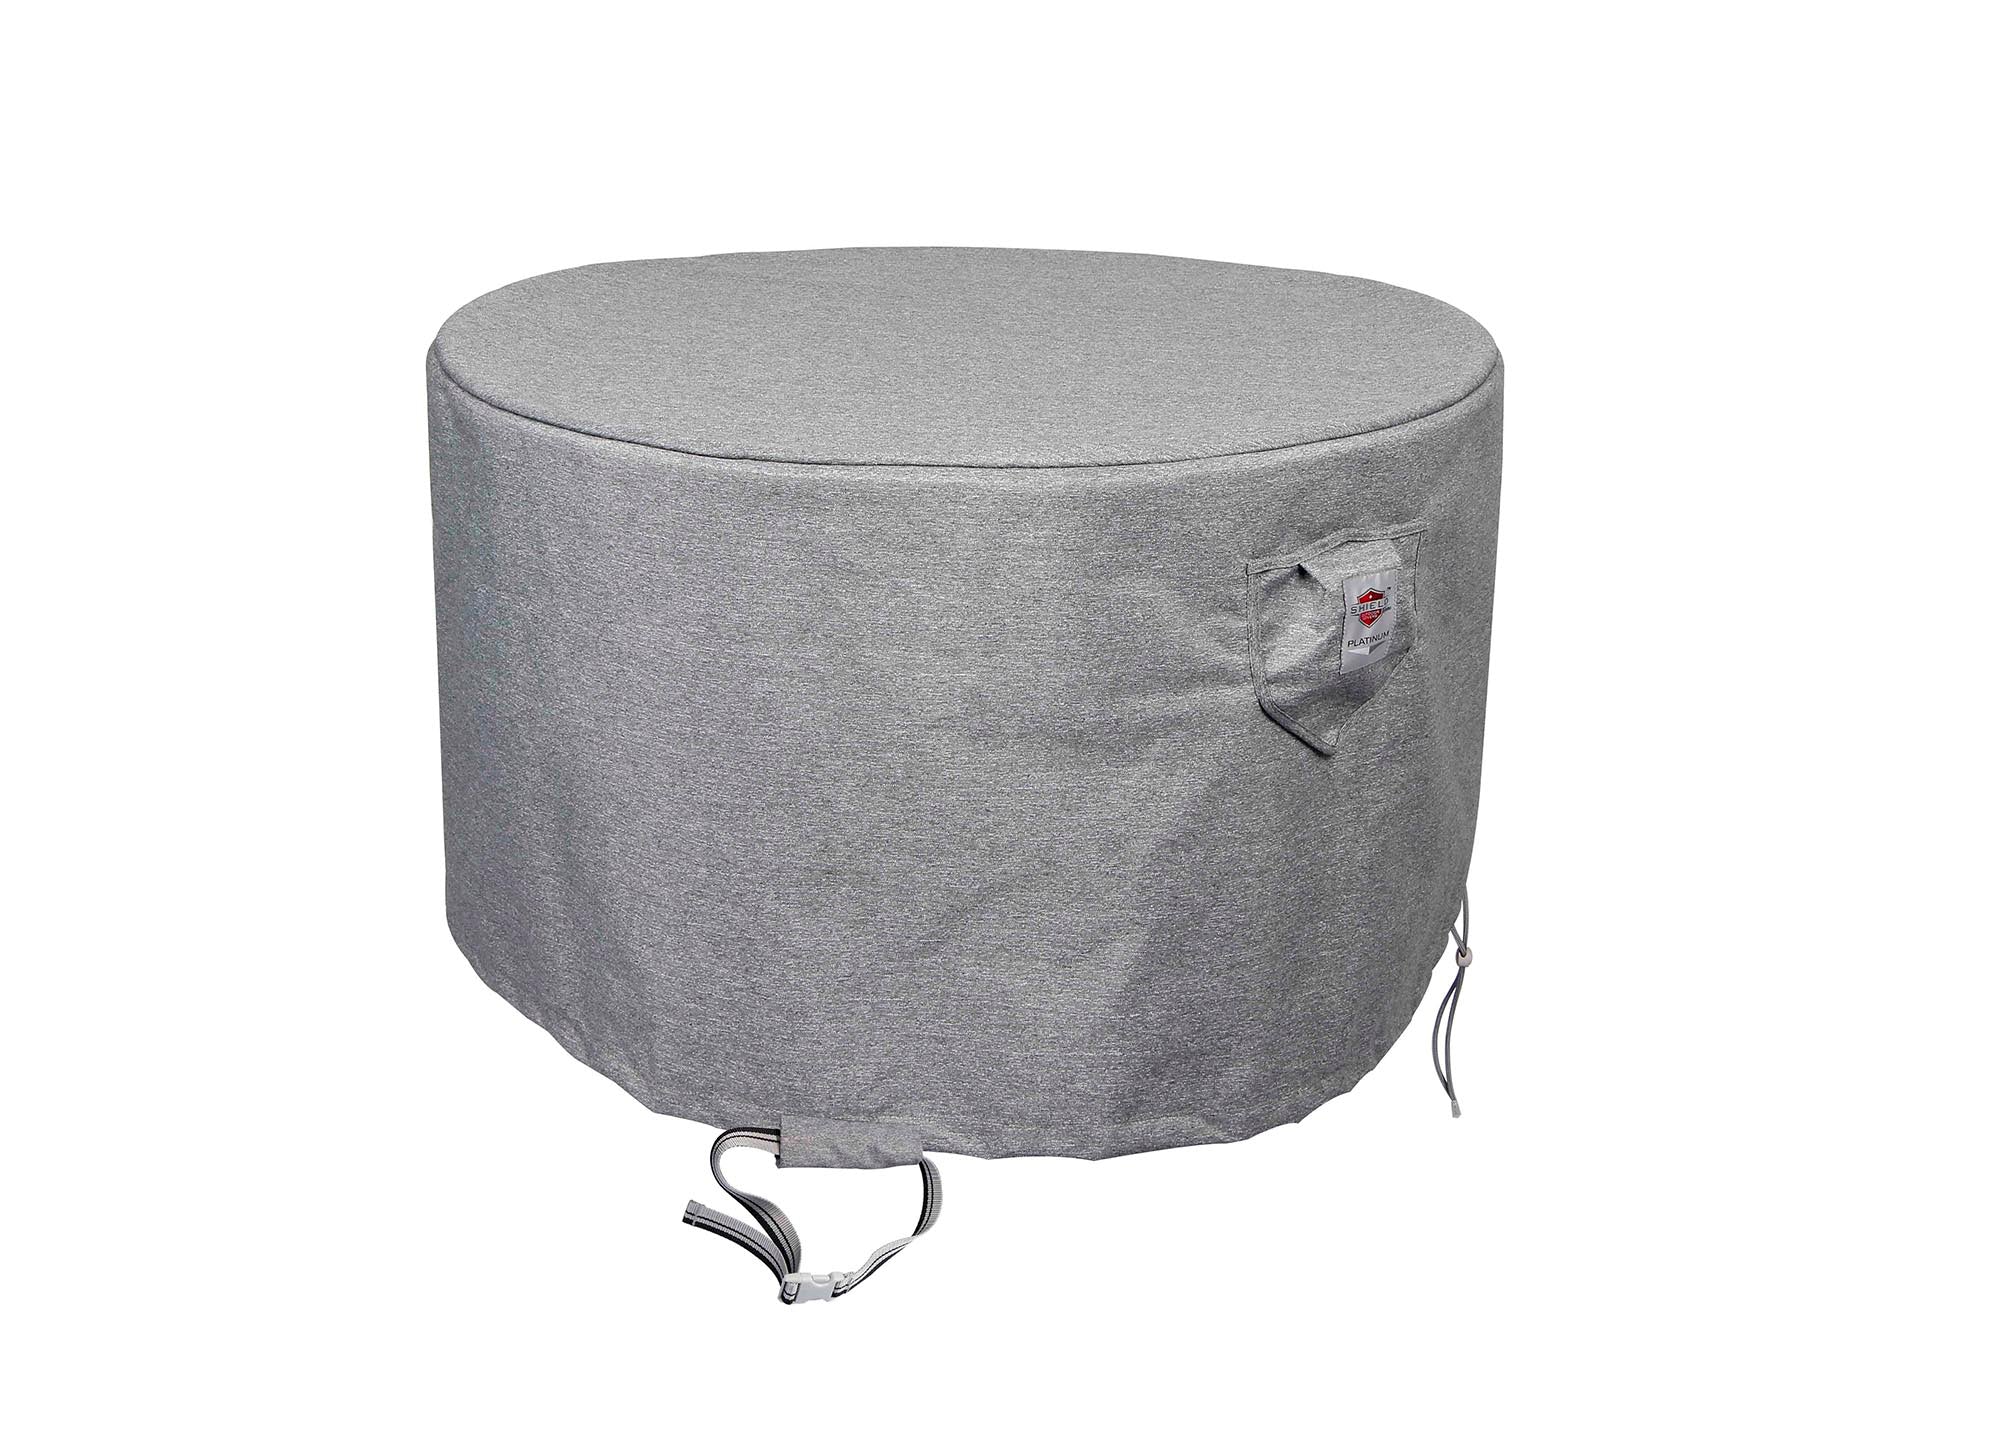 Fire Table Cover Round - 53"Dia x 25"H Platinum By Shield